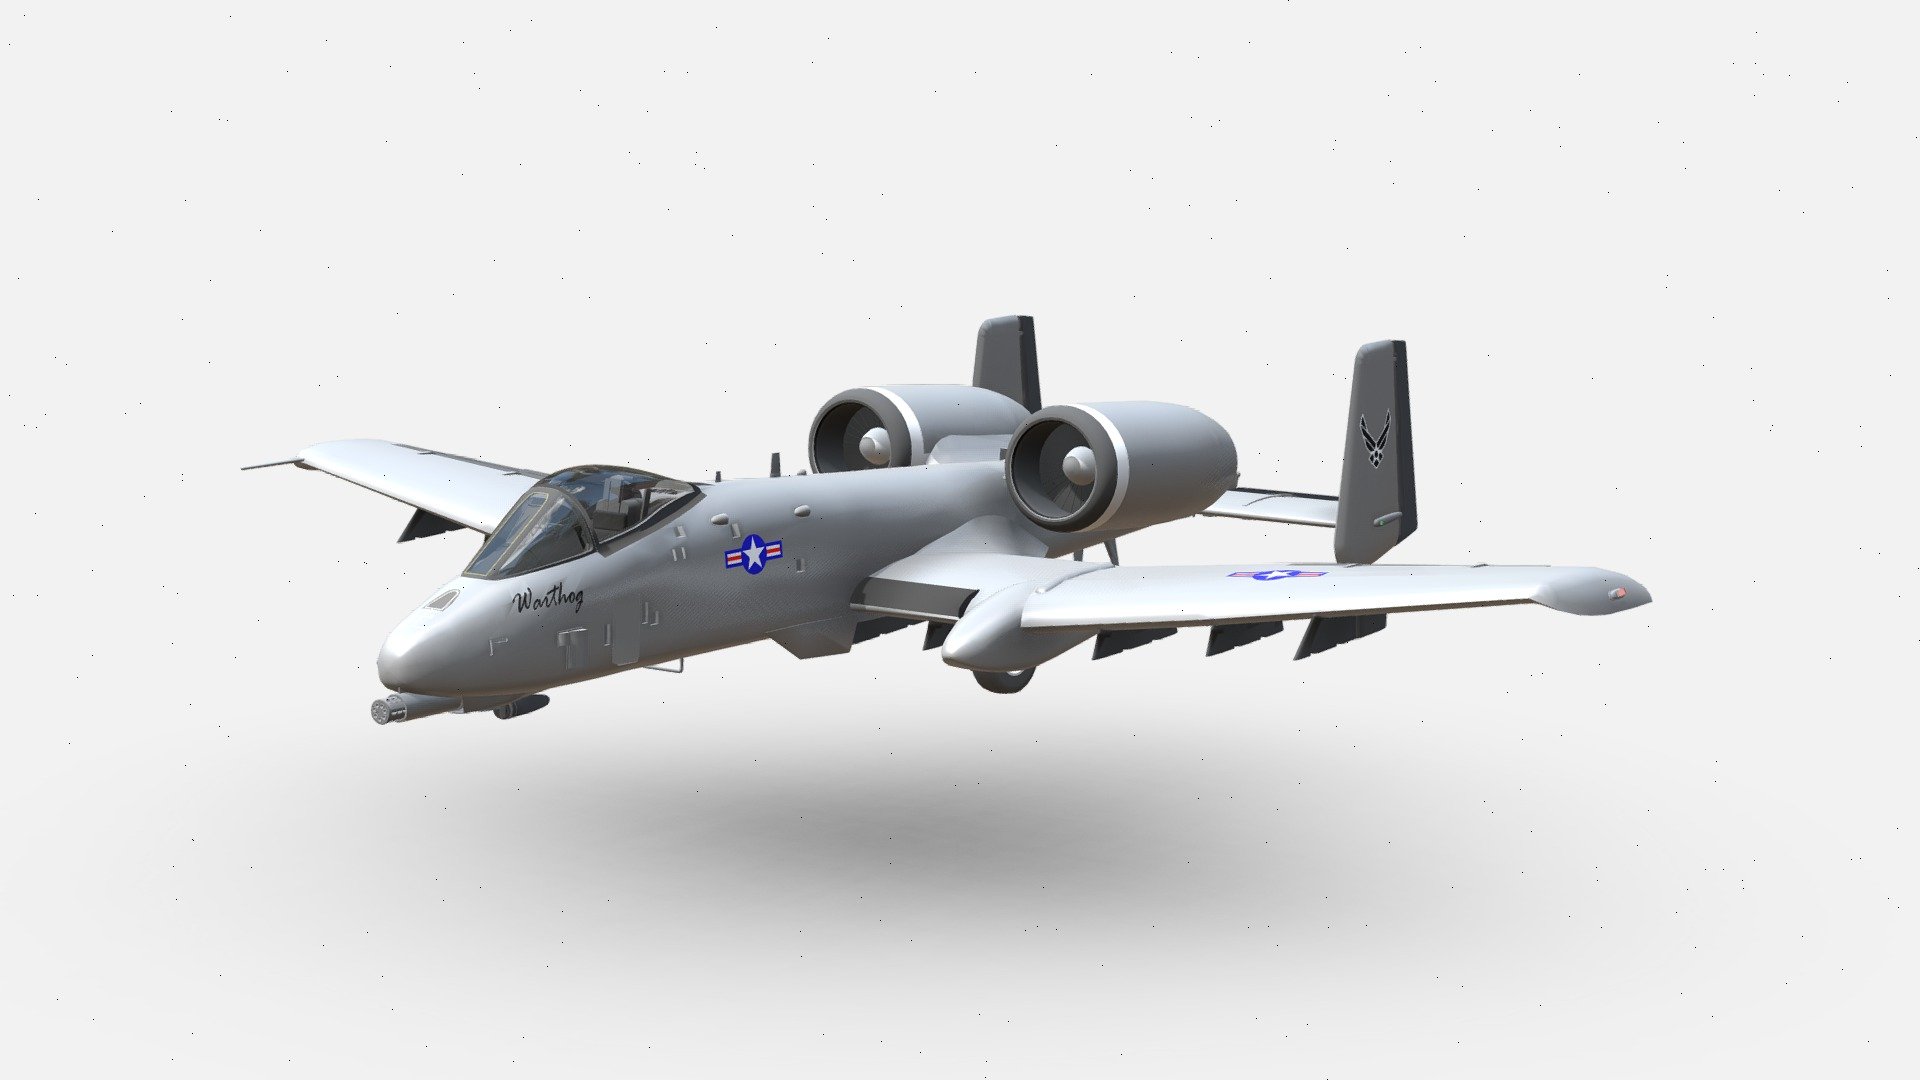 Explore a detailed 3D model of the iconic Fairchild-Republic A-10 Thunderbolt II, affectionately known as the &lsquo;Warthog.' This meticulously crafted representation showcases the aircraft's rugged design, distinctive features, and remarkable capabilities. The A-10 is renowned for its role in providing close air support to ground forces, boasting the powerful GAU-8 Avenger Gatling cannon and impressive combat performance. Dive into the intricacies of this military legend and bring the spirit of close air support to life with this accurate 3D model

see all collecrion: https://skfb.ly/oOsEV - 3d model Fairchild - Republic A-10 - Buy Royalty Free 3D model by zizian 3d model